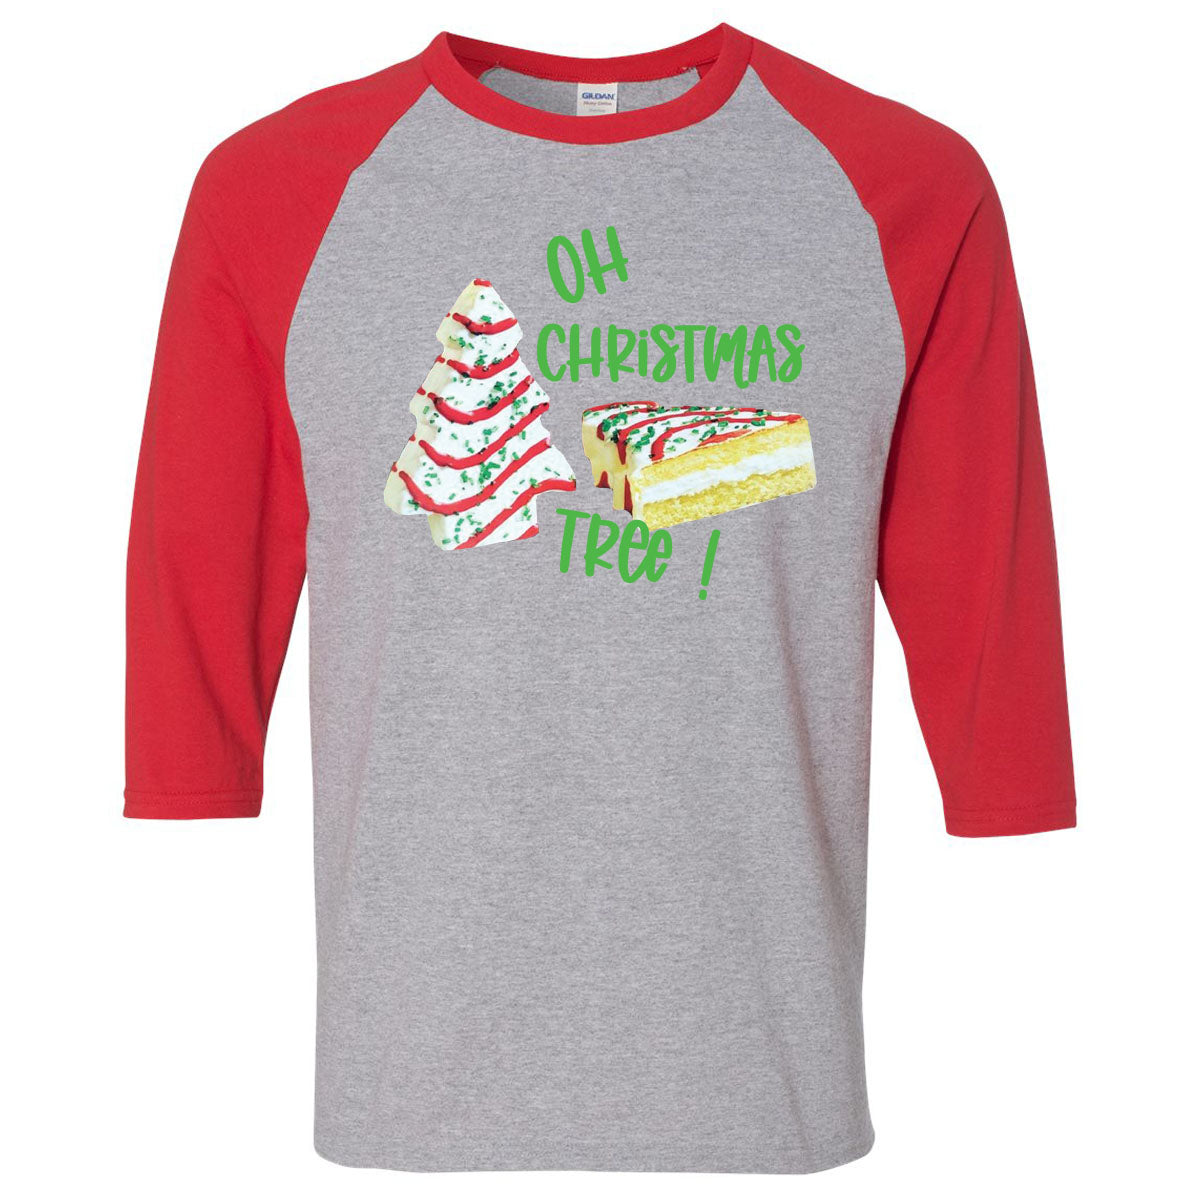 Oh Christmas Tree Cakes - Sport Grey/Red Raglan - Southern Grace Creations